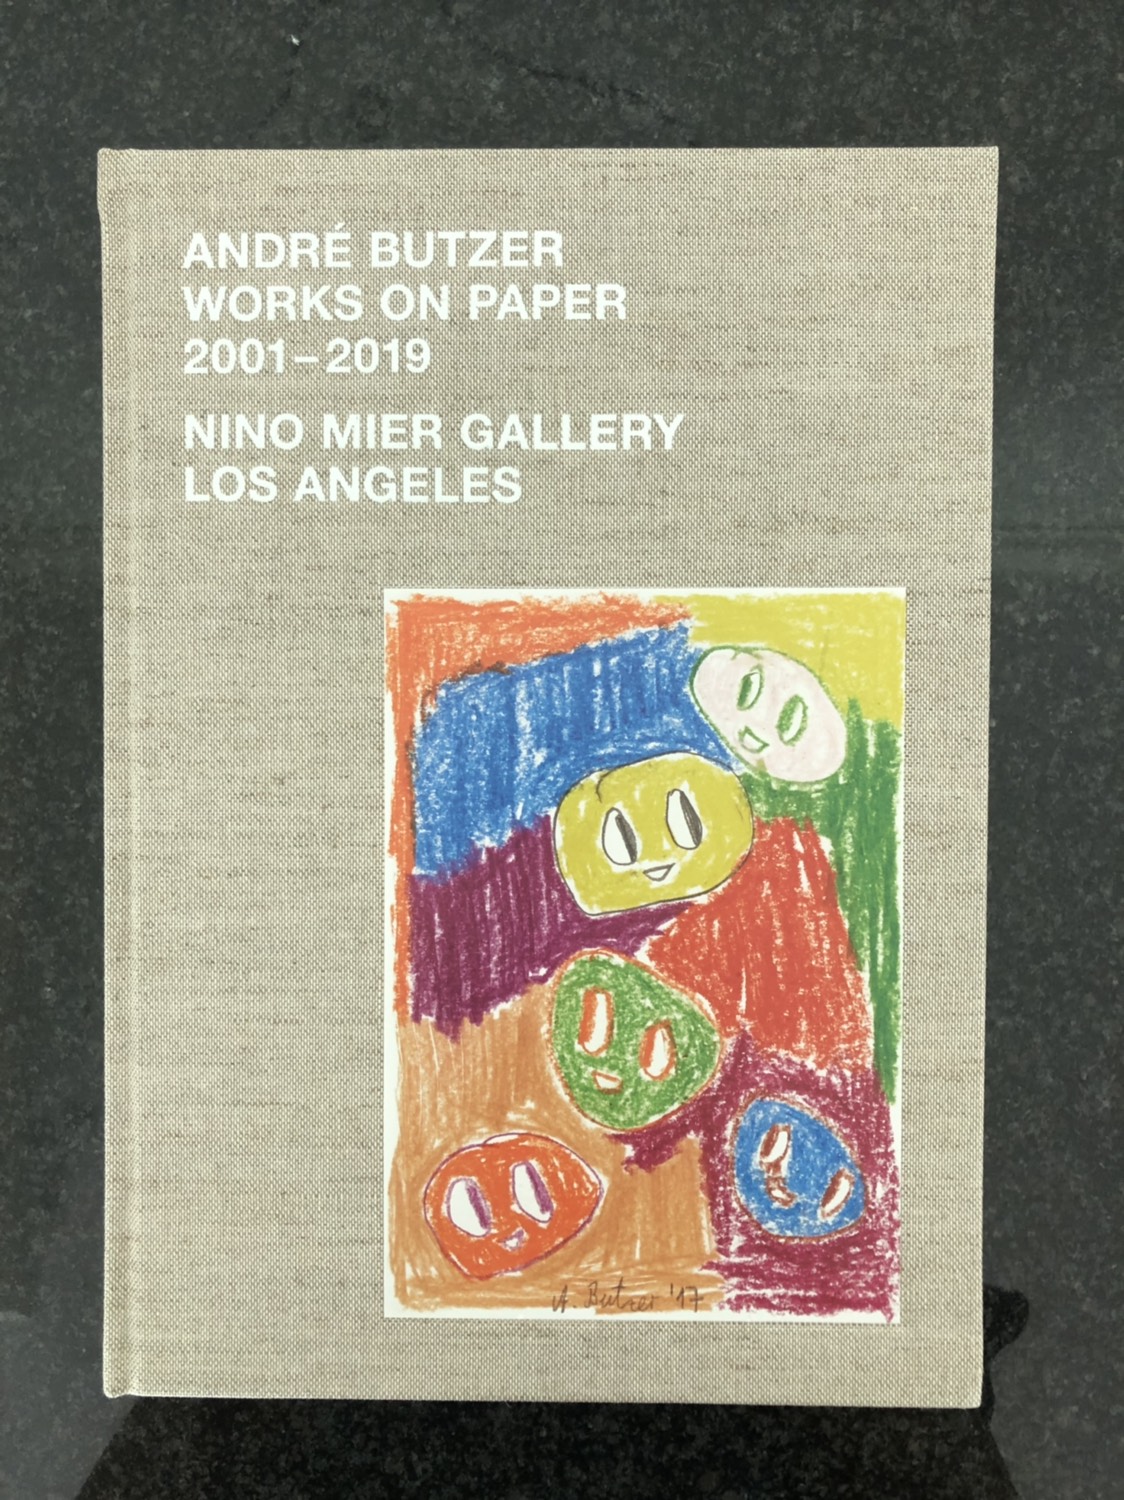 Works on paper - Nino Mier Gallery